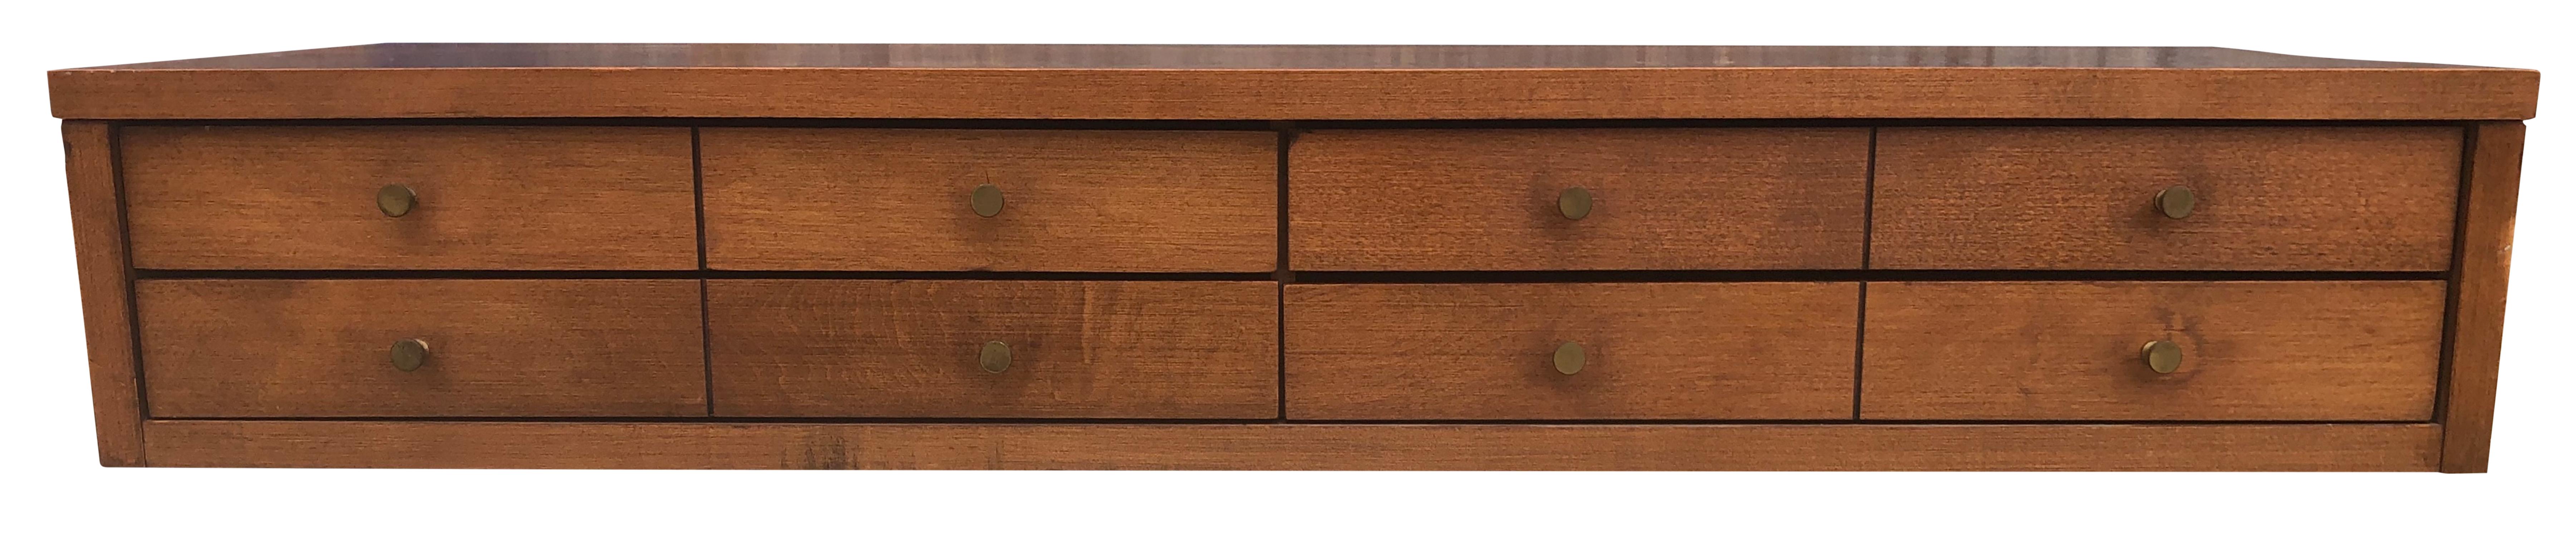 Nice Paul McCobb 3' small chest of drawers in solid maple construction with tobacco finish. Very high quality construction with original brass pulls. Made for top of dresser or bookcase. 8 brass knobs 4 drawers. Planner Group, Winchendon Mass. In